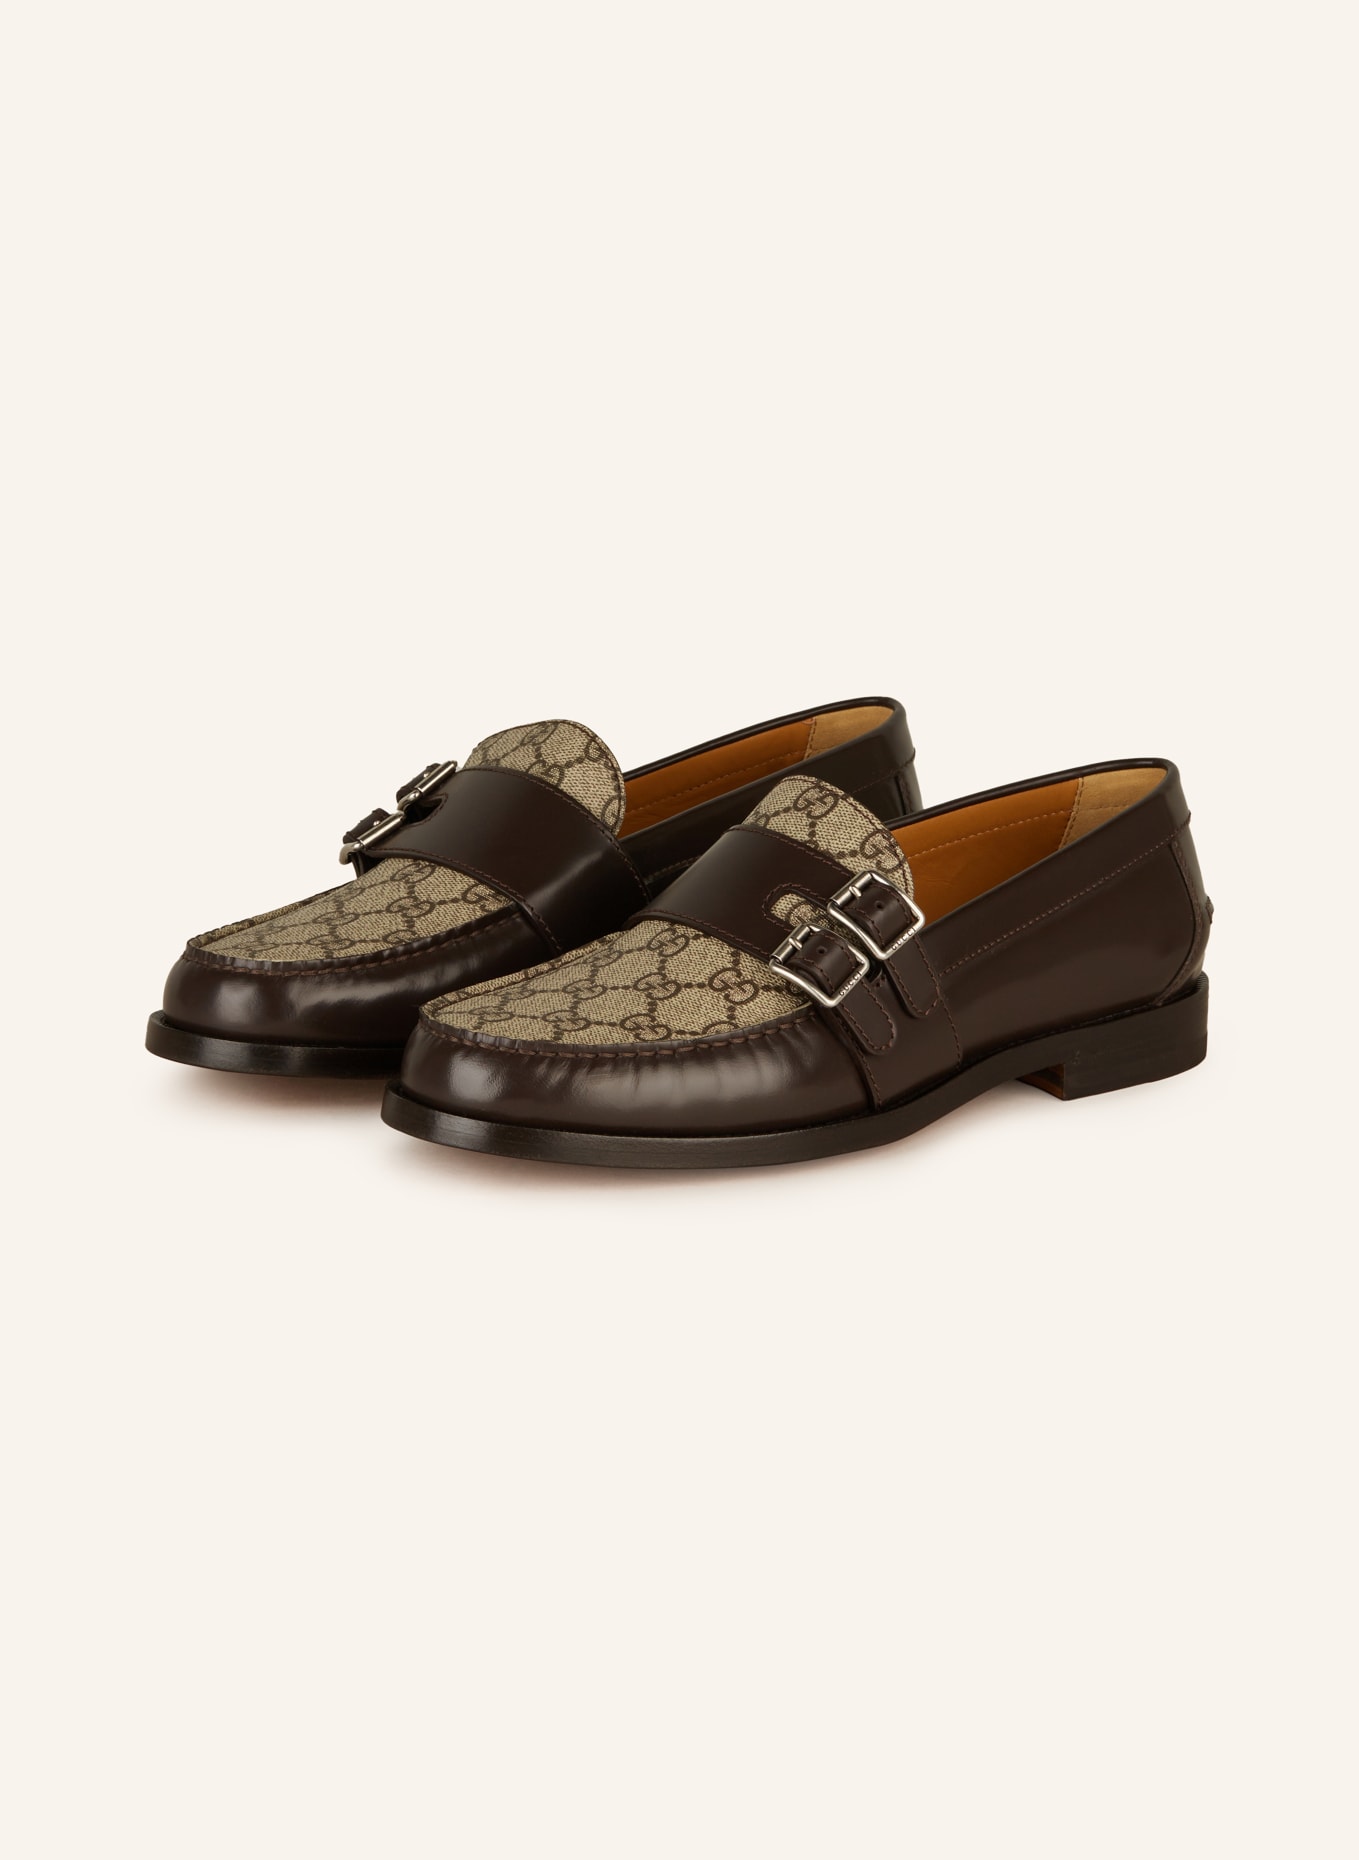 GUCCI Loafers, Color: 2143 BEIGE (Image 1)